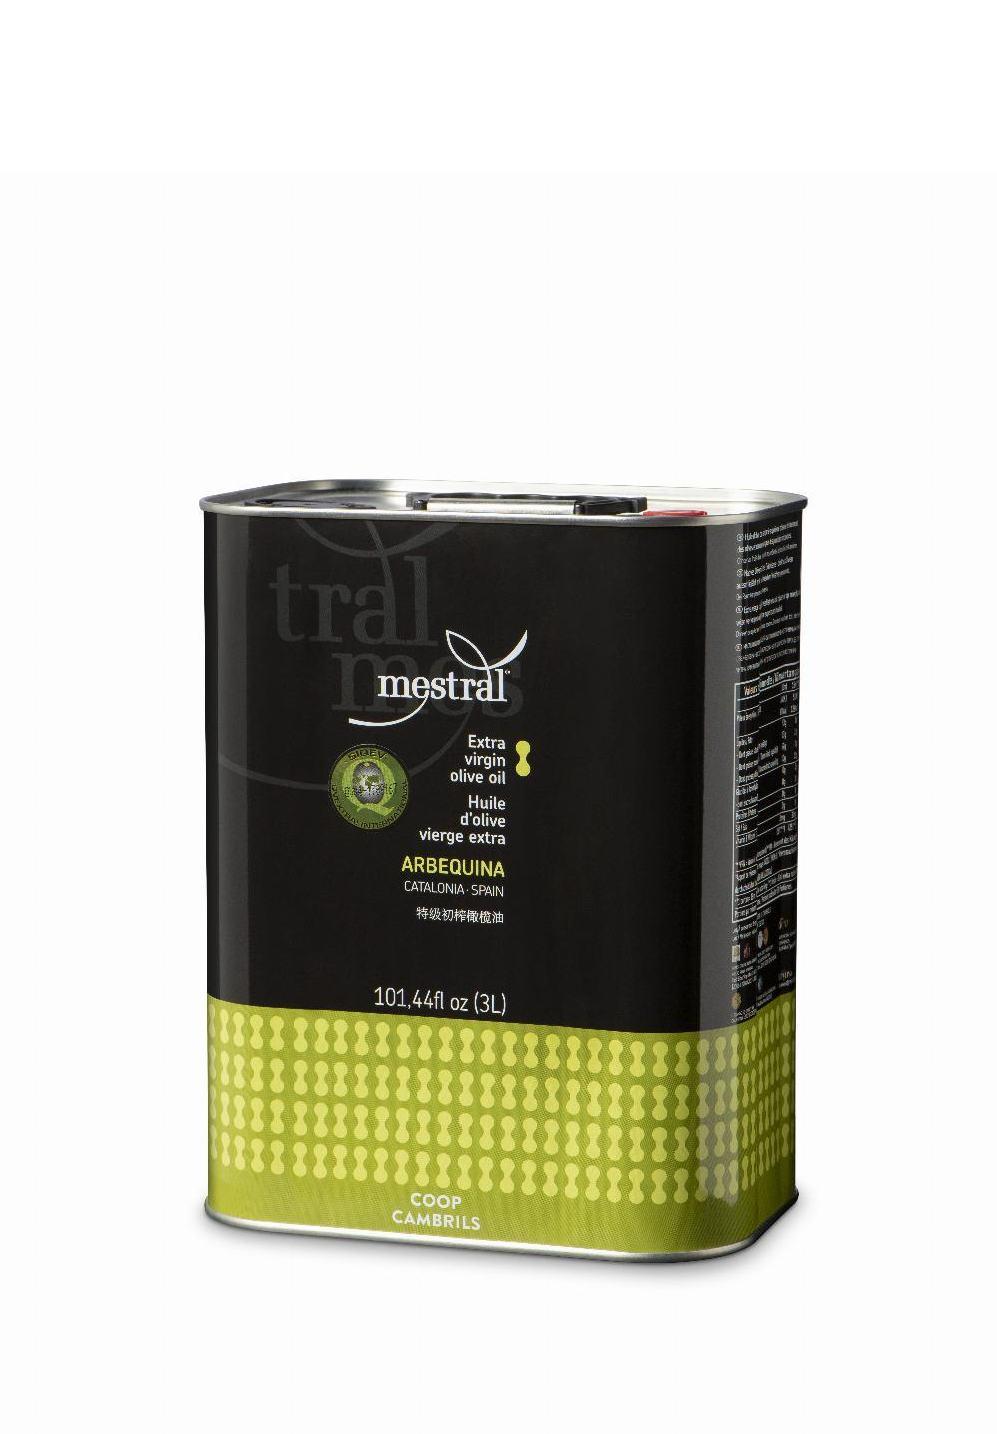 Huile d'Olive Vierge Extra Mestral Boite 3L 100% Arbequina